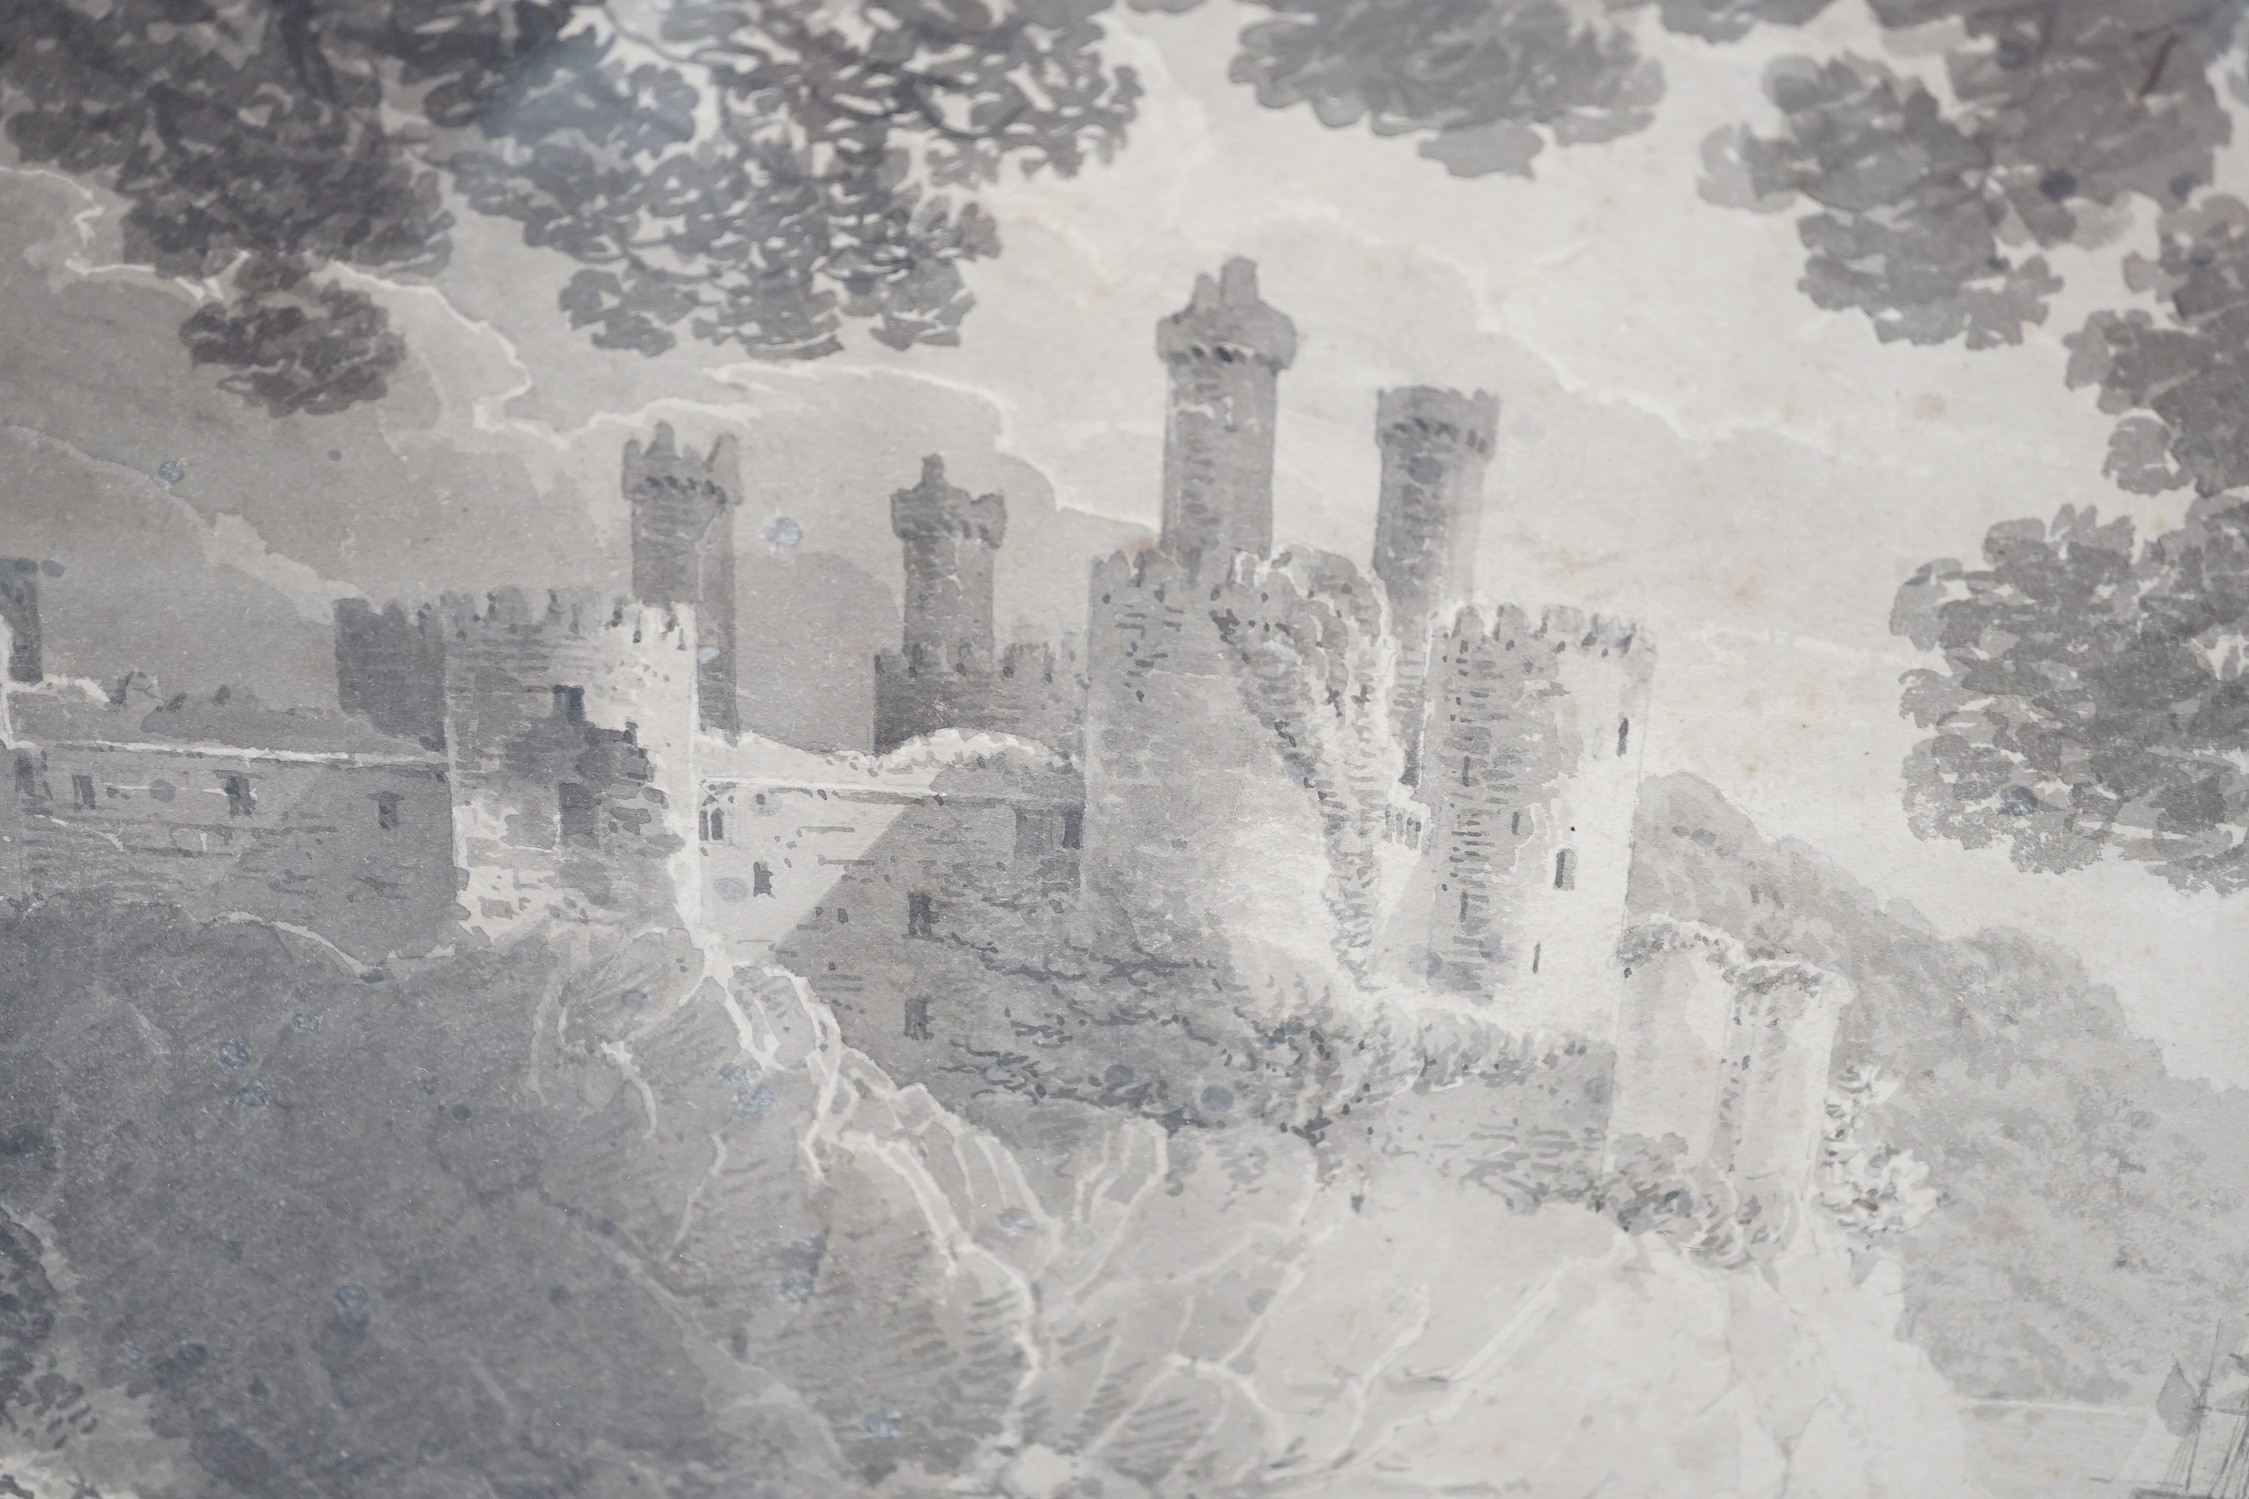 Early 19th century English School, monochrome watercolour, Coastal castle viewed from woods, 27 x 33cm